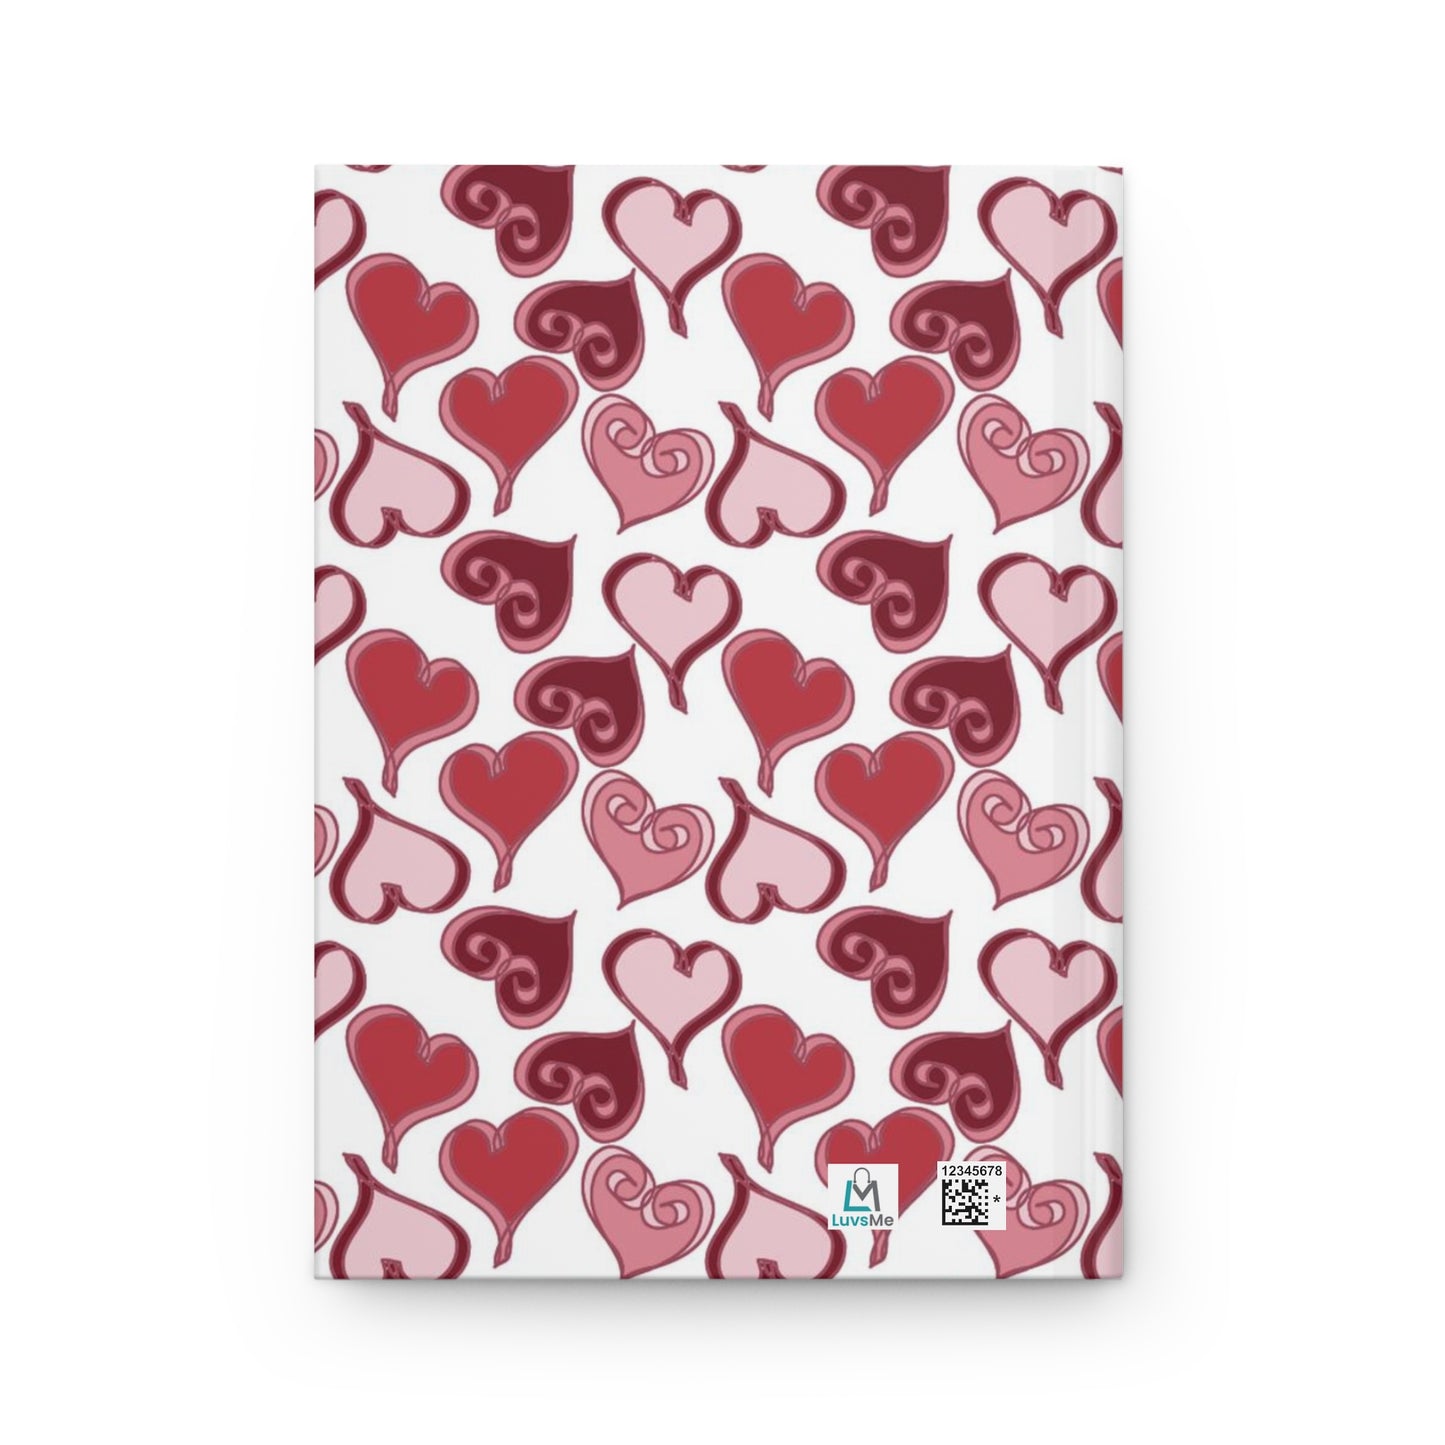 Beautiful Hearts - Pink, Red, and White - Hardcover Lined Journal Matte